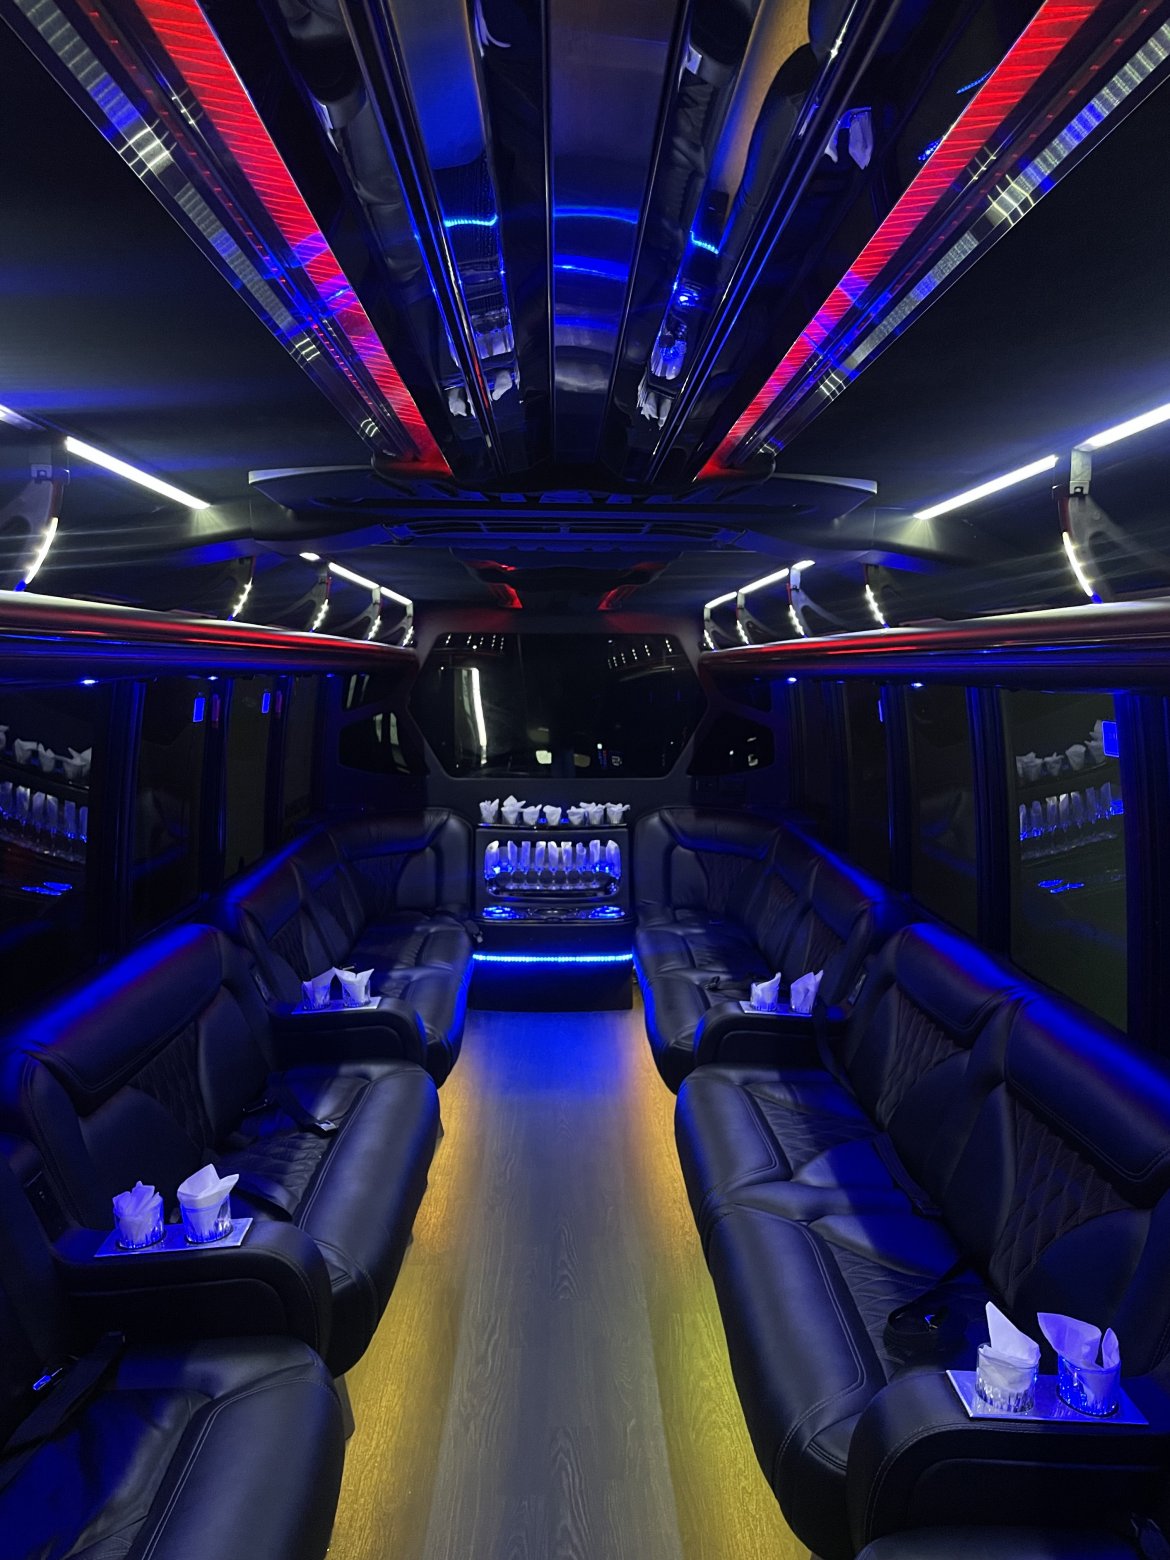 Limo Bus for sale: 2018 Ford F-550 Limo Bus by Grech Motors